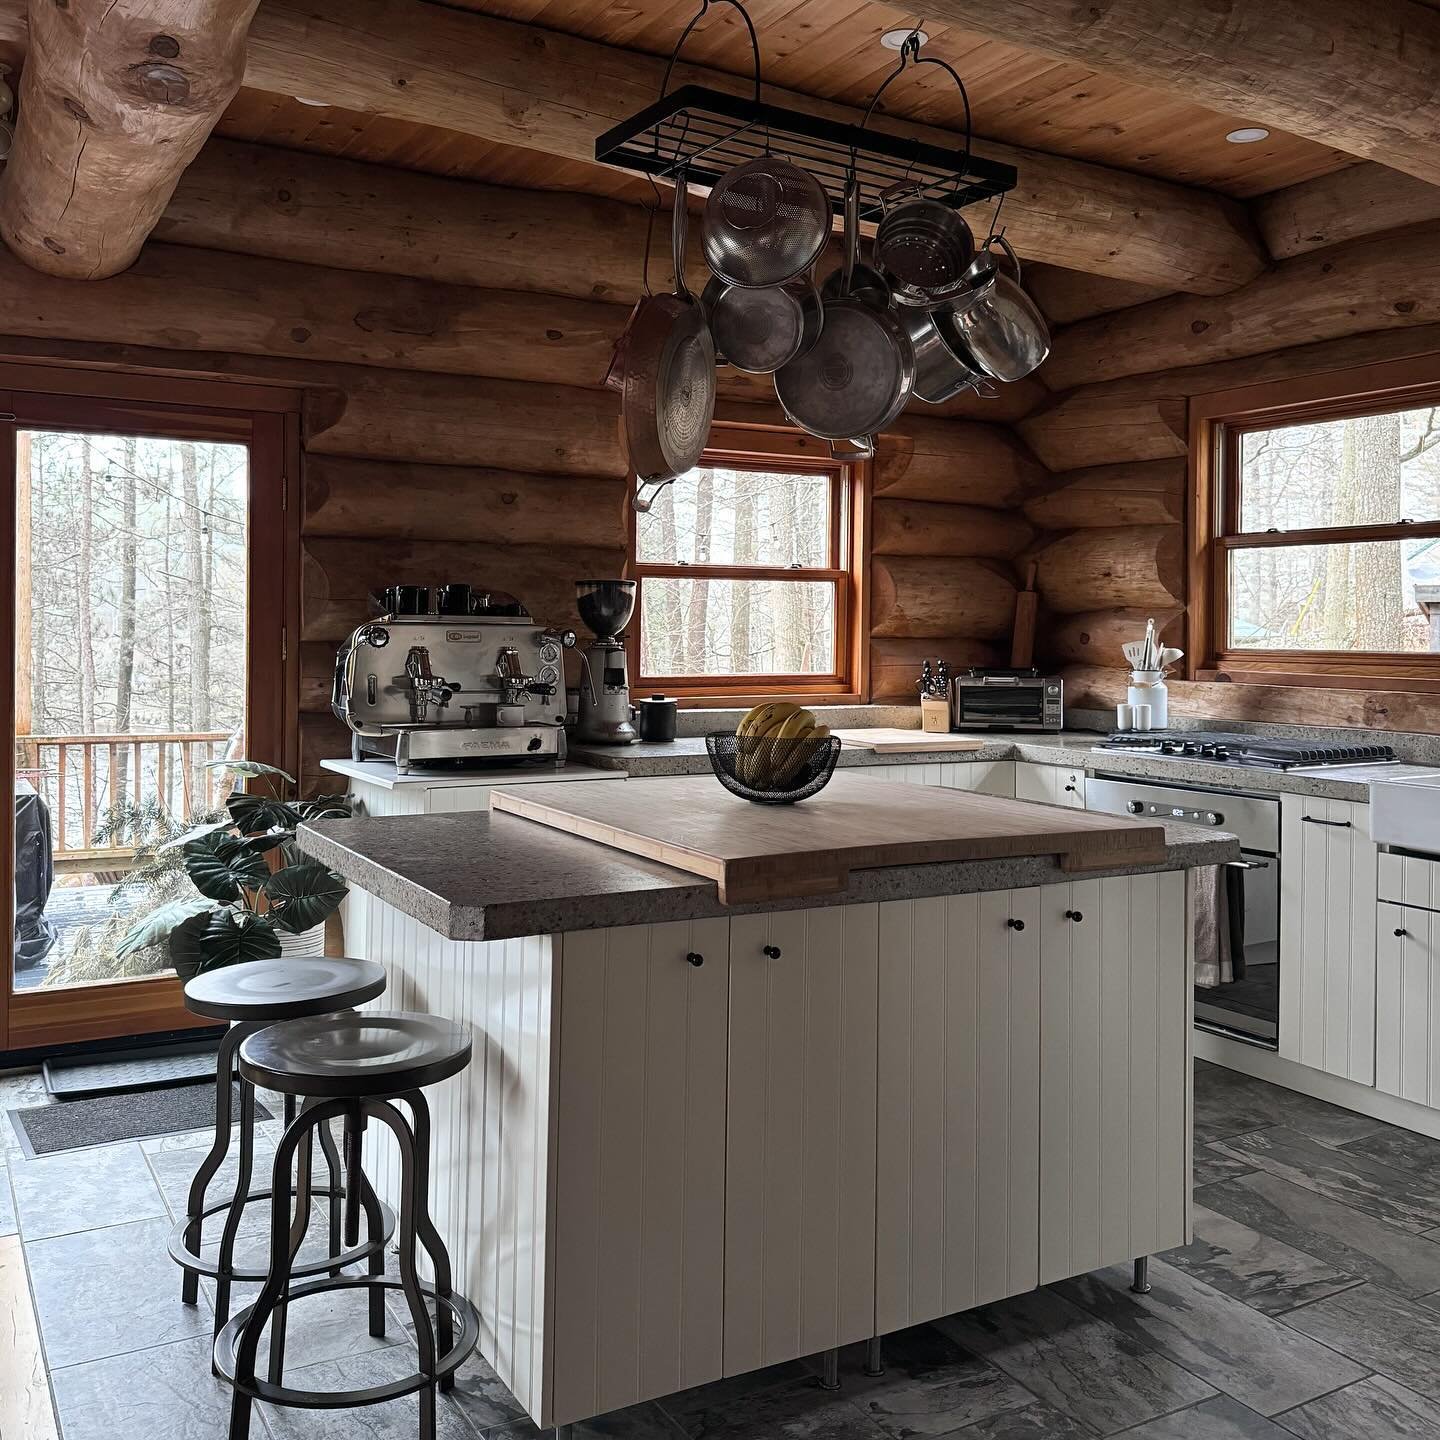 Sure, life isn&rsquo;t perfect. But this place is. 

&mdash;&mdash;&mdash;&mdash;&mdash;&mdash;&mdash;&mdash;&mdash;&mdash;&mdash;&mdash;&mdash;&mdash;&mdash;&mdash;&mdash;&mdash;&mdash;&mdash;&mdash;
#kitchenideas #cottagecore #cabinliving #logcabin